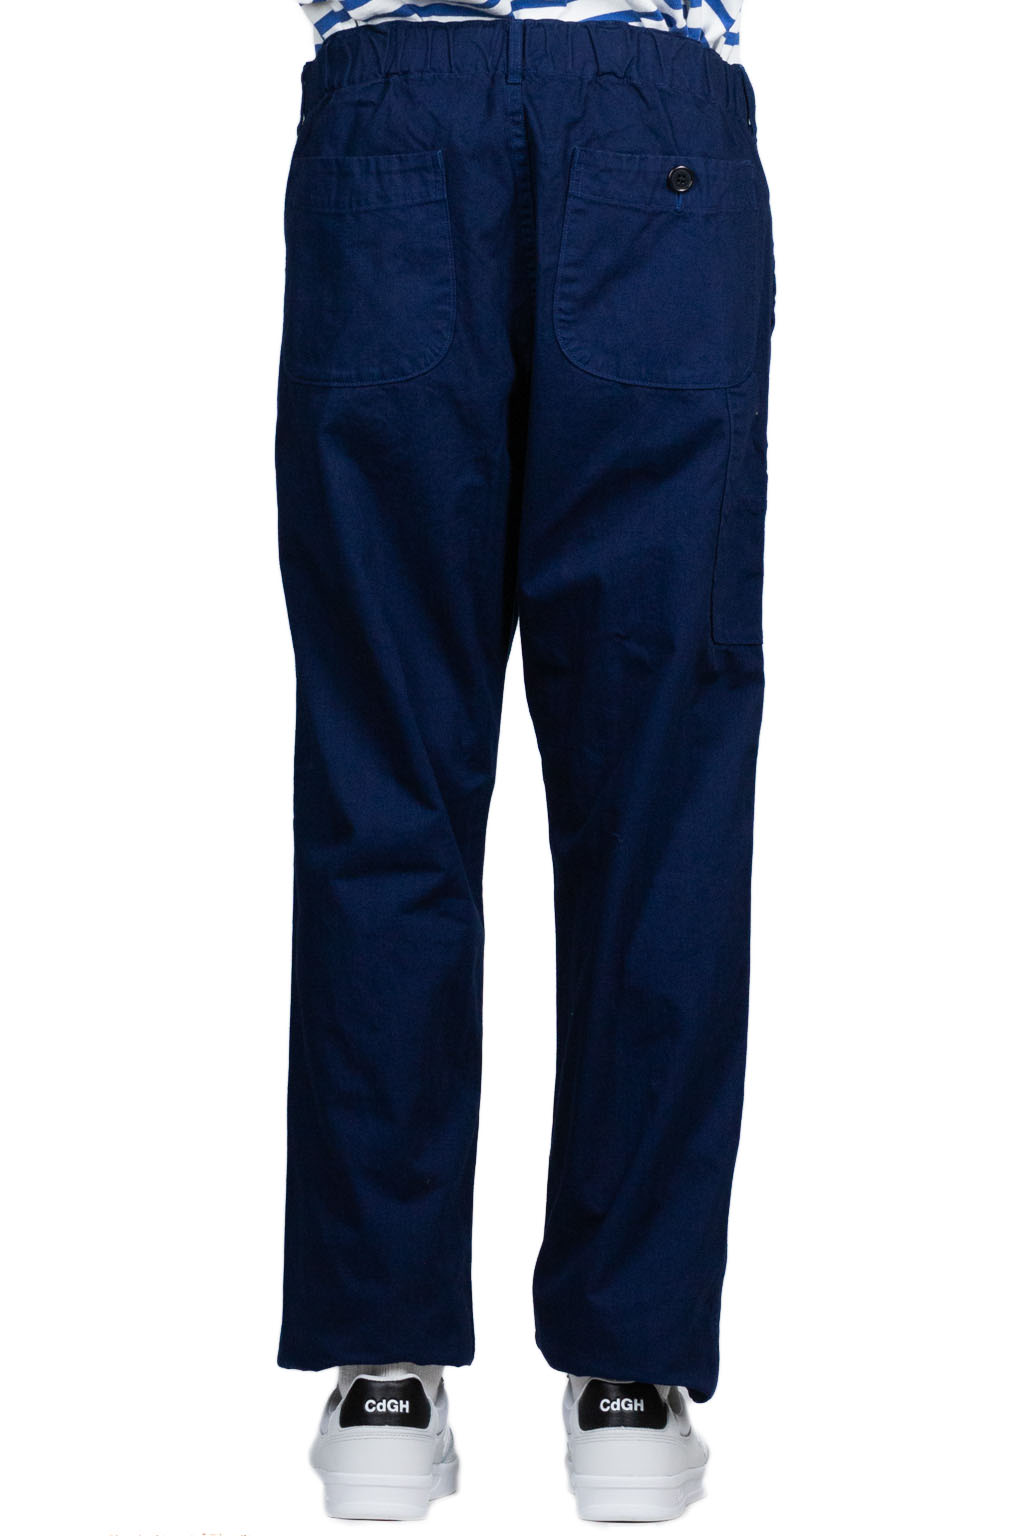 BlueButtonShop - OrSlow - OrSlow-French-Work-Pants-Blue-03-5000-03